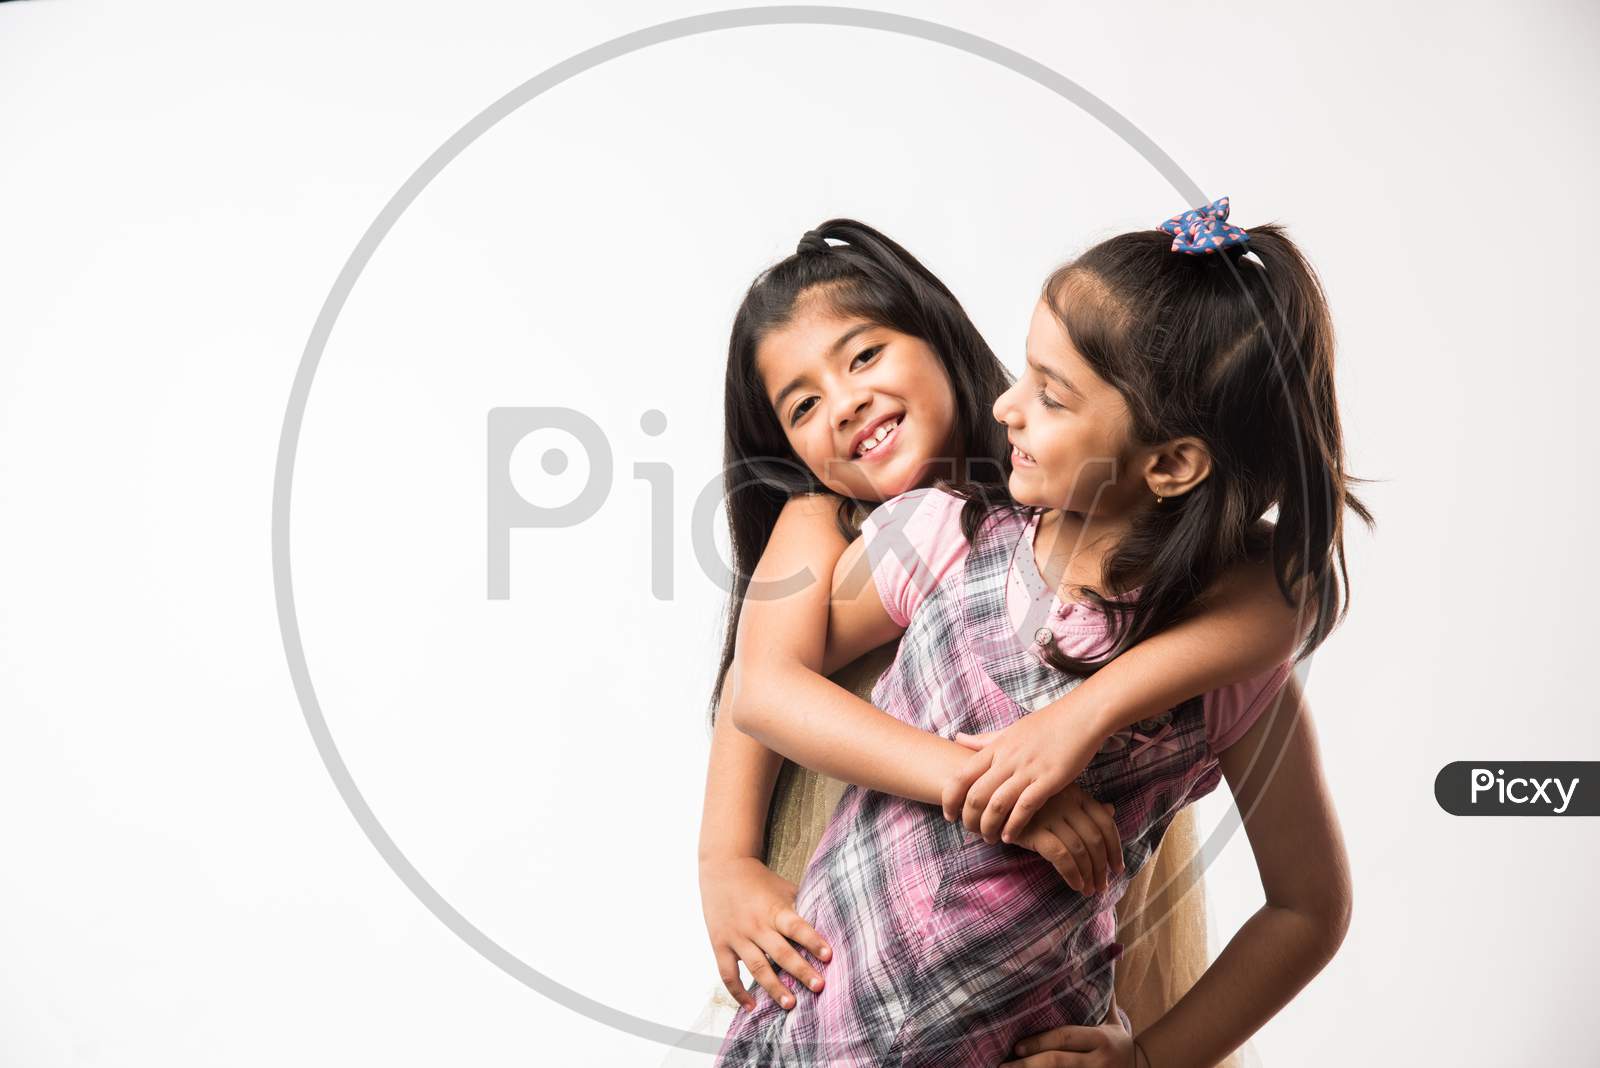 Playful and pretty Indian/asian little sisters or friends in playful mood, hugging, dancing, pushing each other. Isolated over w